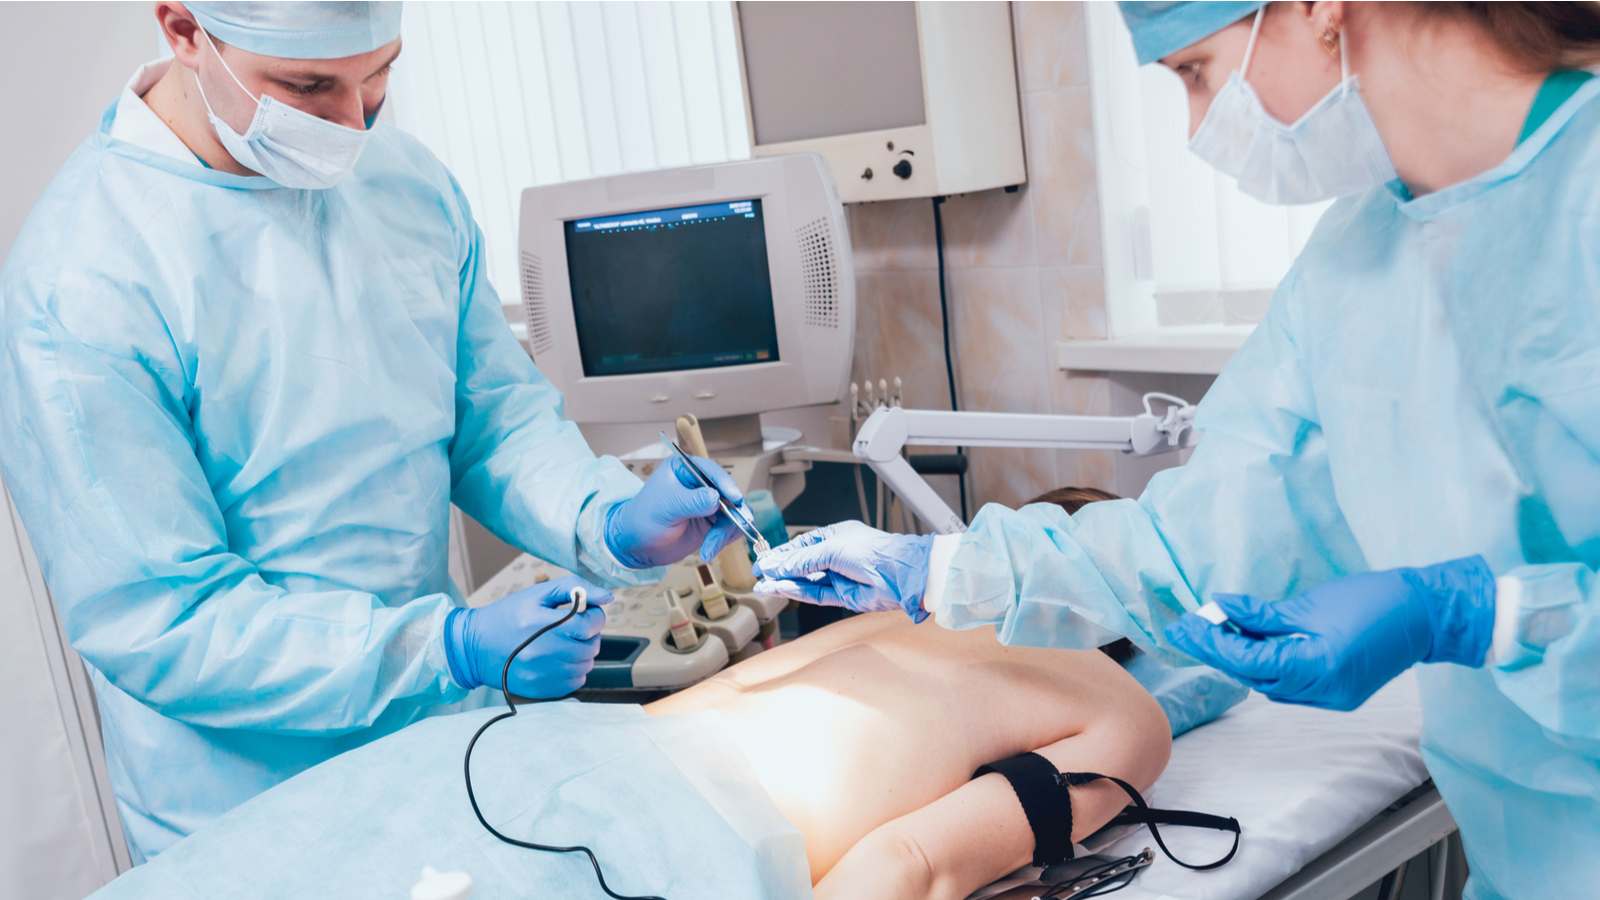 An image of two medical professionals performing a procedure on a patient